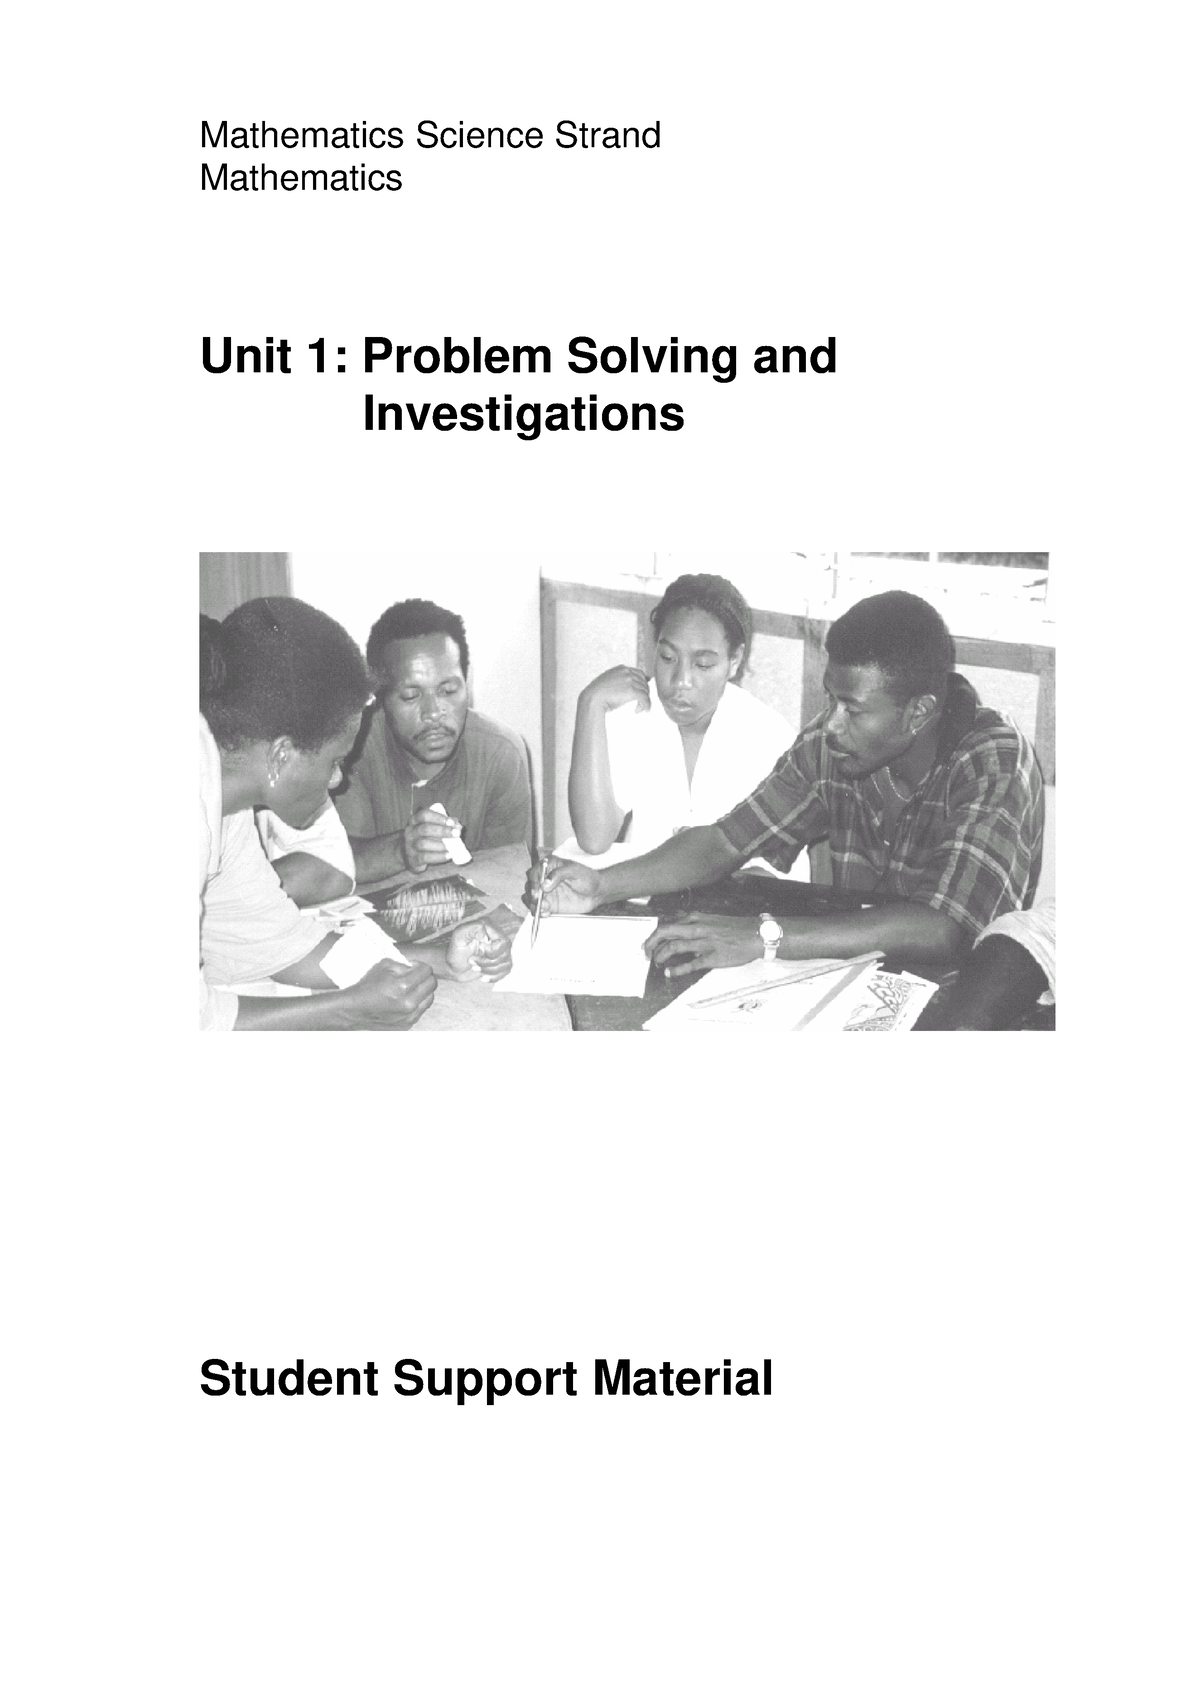 similarities of problem solving and mathematical investigation